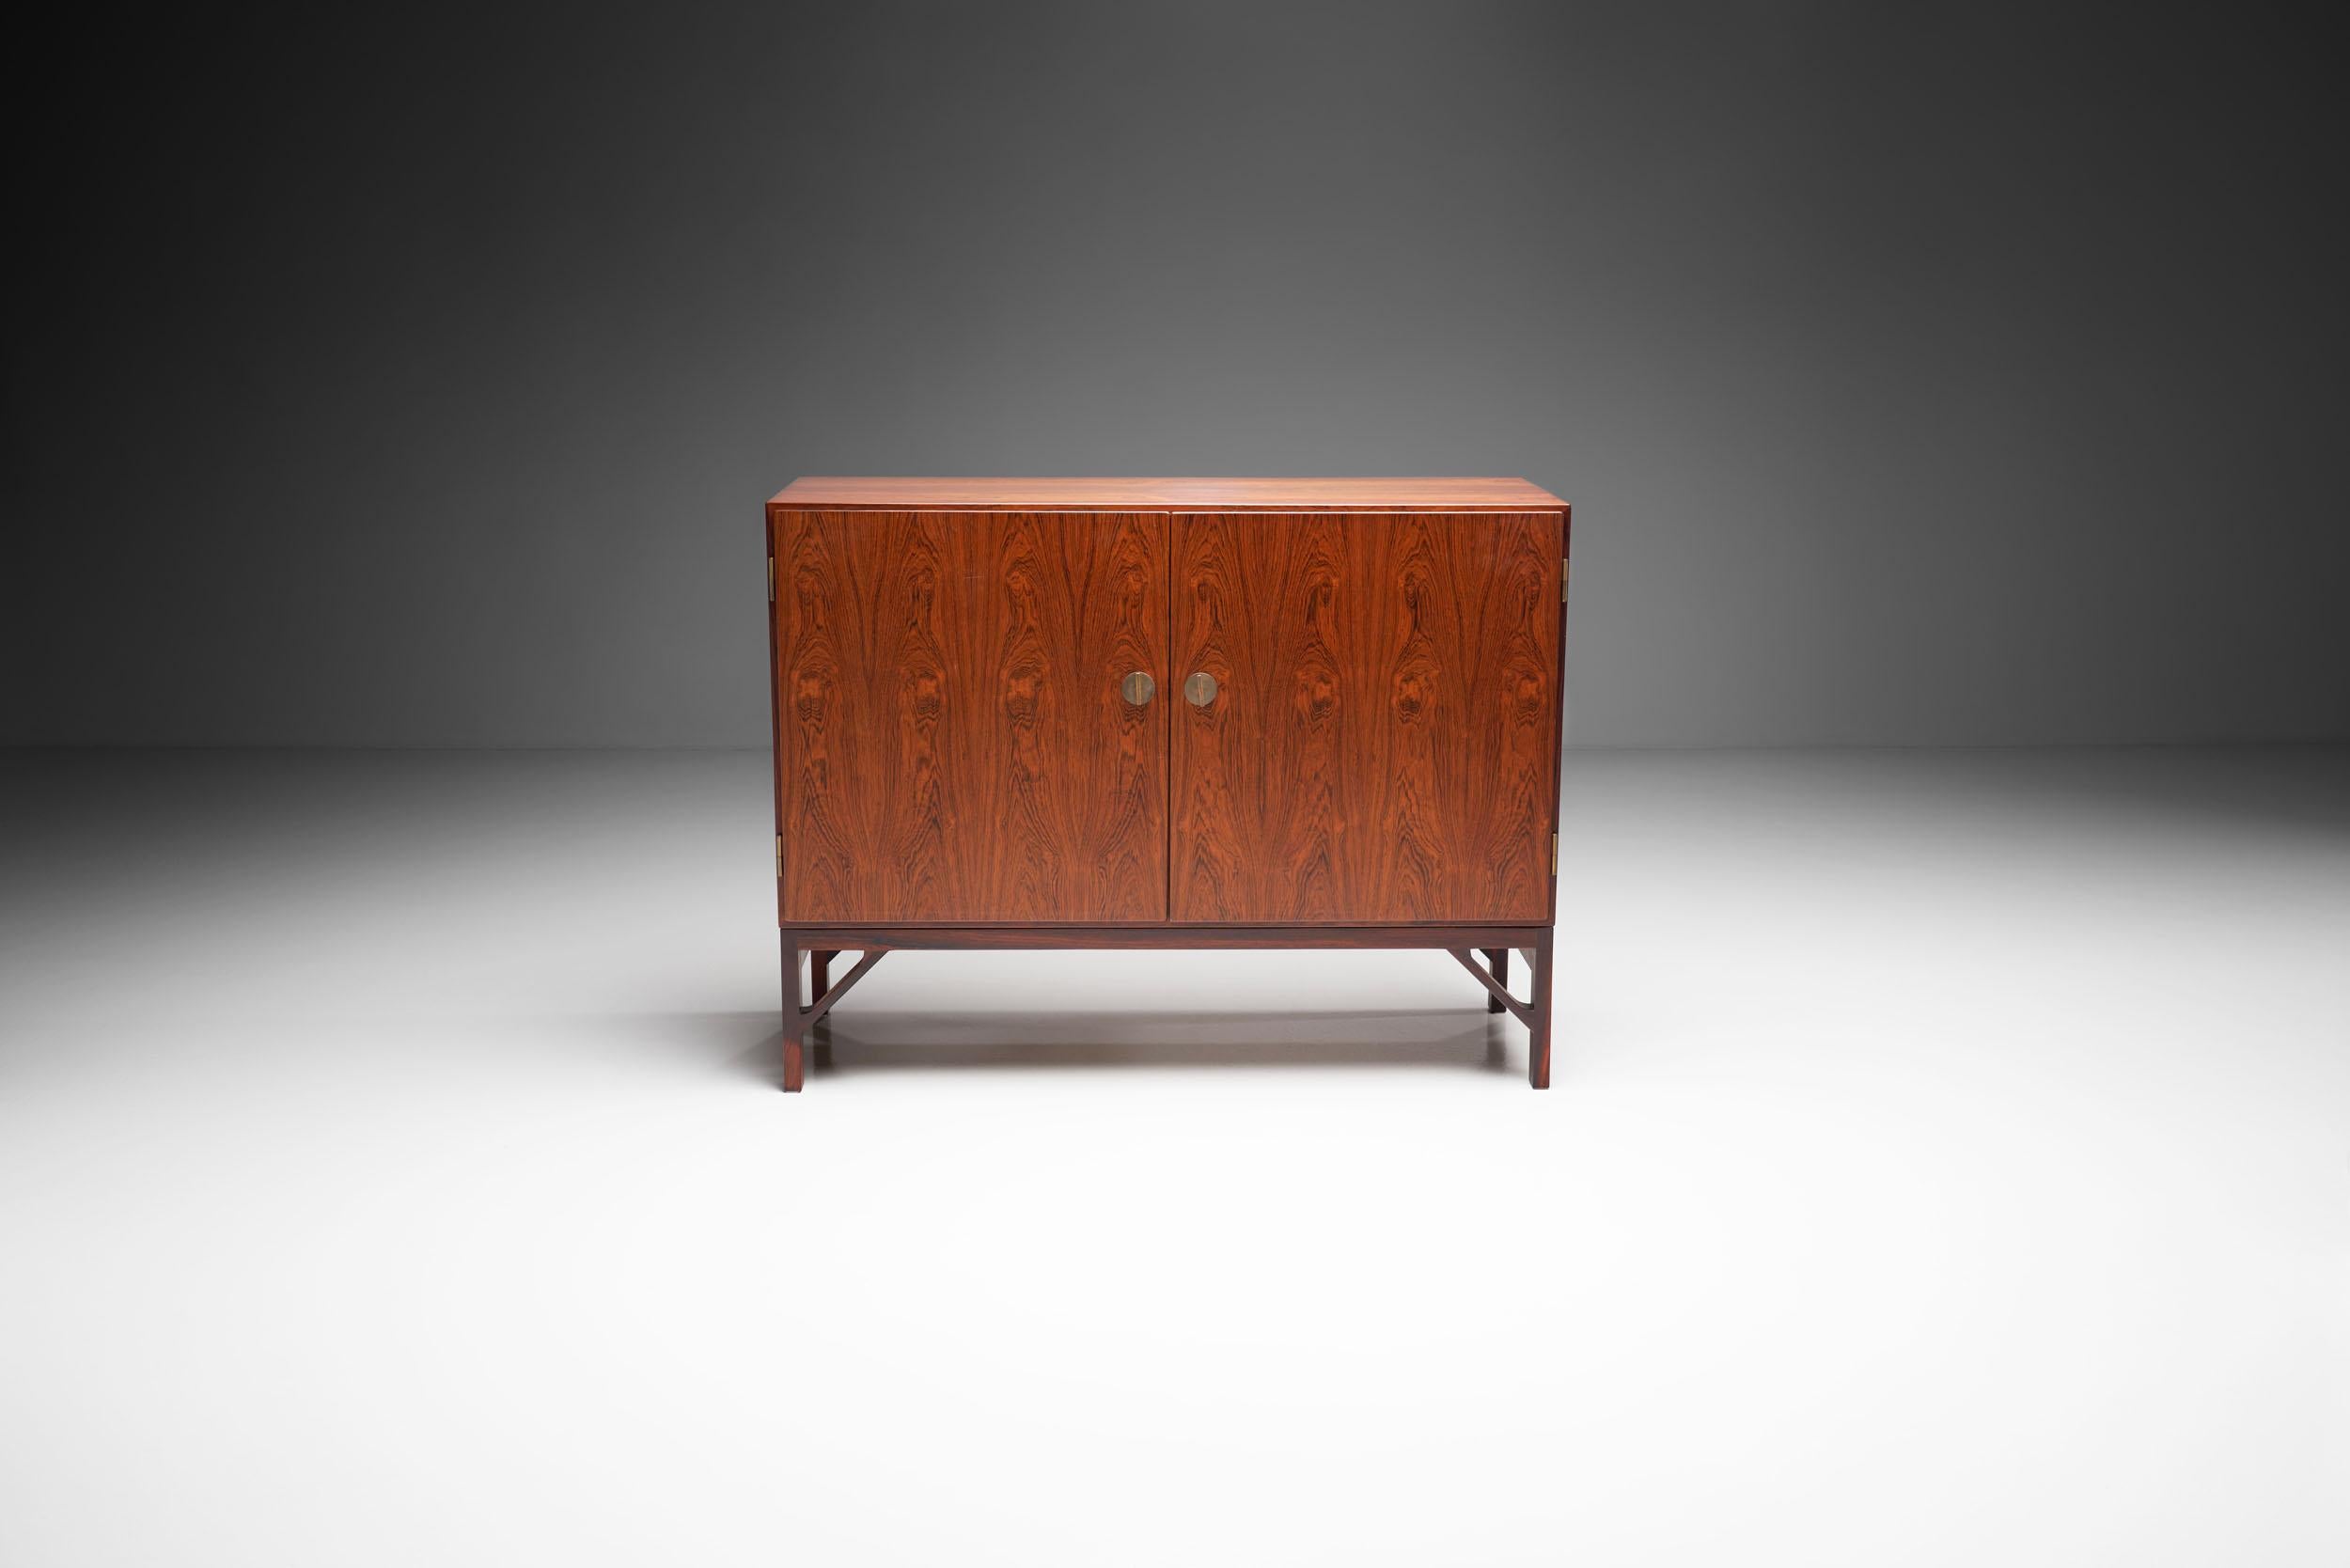 Model A 232 cabinet by Danish designer Børge Mogensen, manufactured by C.M. Madsen for F.D.B. Møbler in Denmark, 1950s.

This cabinet is made of Brazilian rosewood, giving it a beautiful warm color and pattern. The spacious cabinet has two front